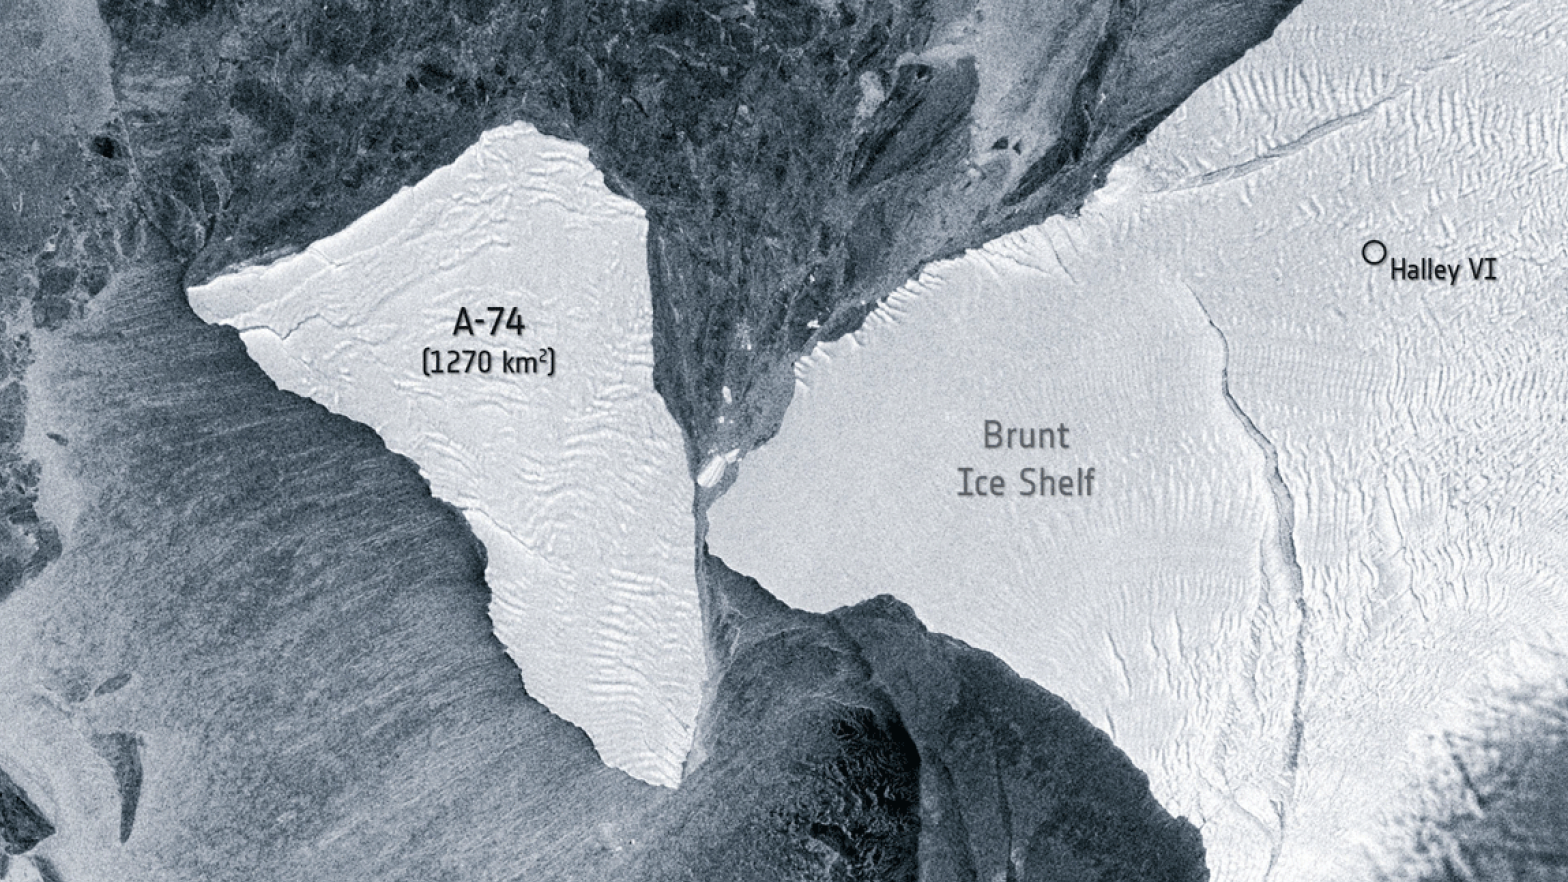 Iceberg A-74 and the Brunt Ice Shelf as they appeared on August 11, 2021.  (Image: ESA/Sentinel-1)